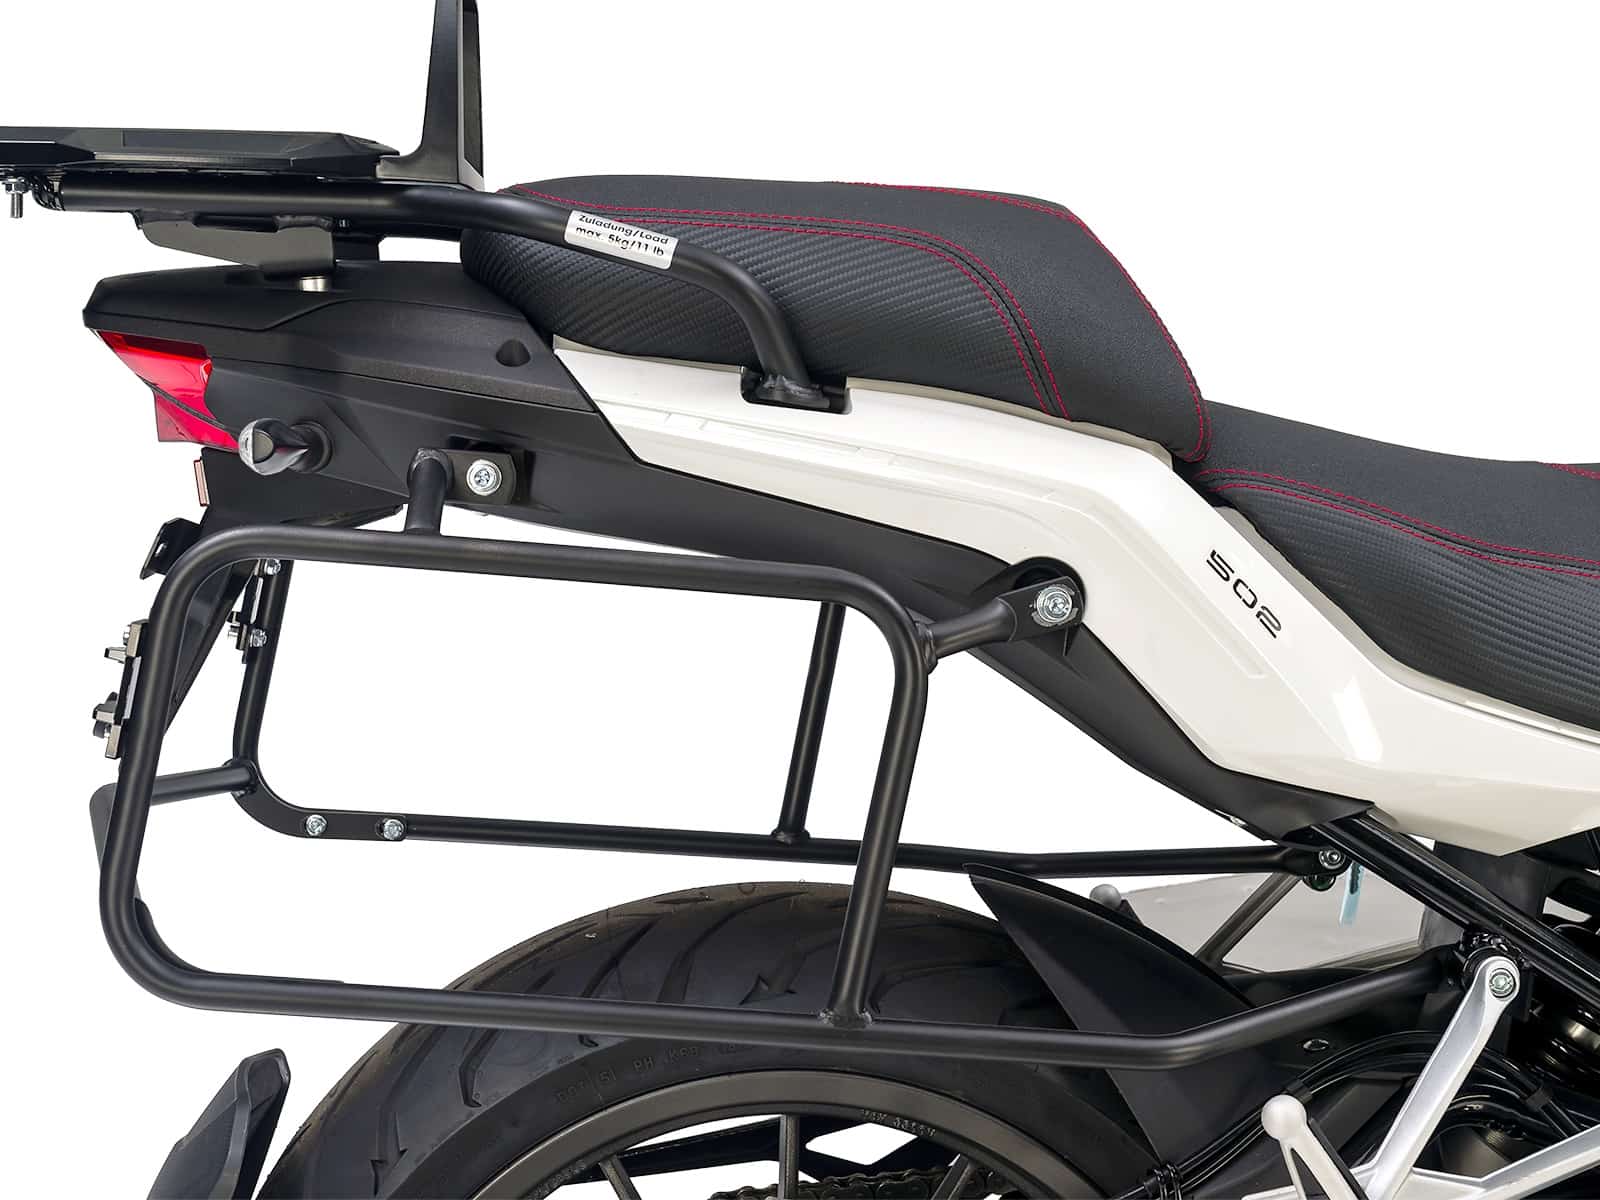 Sidecarrier permanent mounted black for Benelli TRK 502 X (2018-)